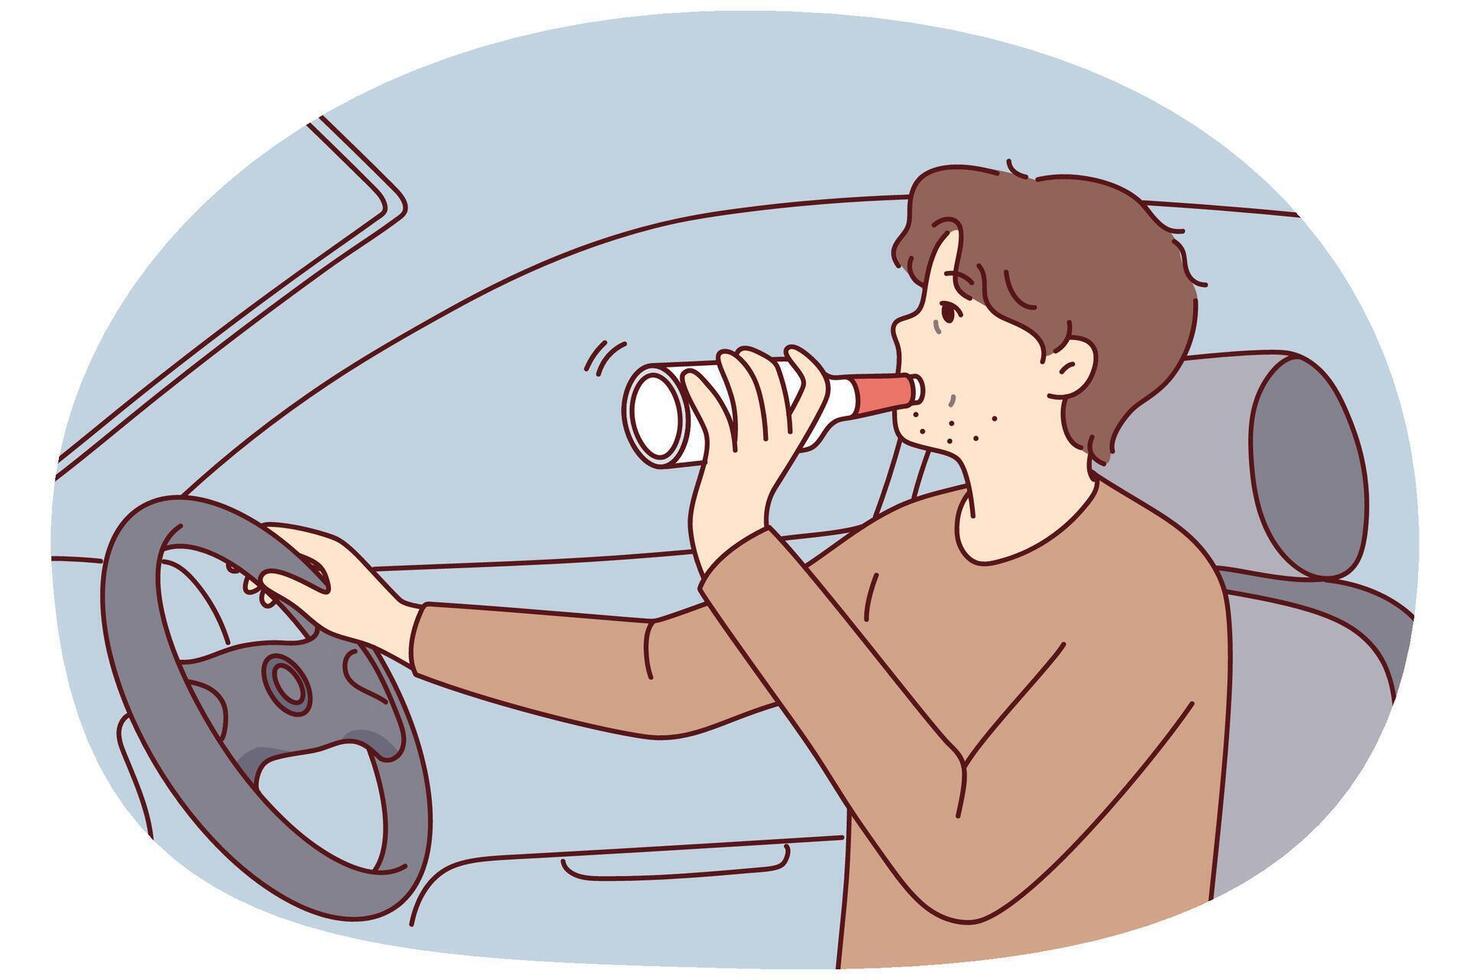 Irresponsible man drinks alcohol from bottle driving car risking lives of pedestrians. Vector image